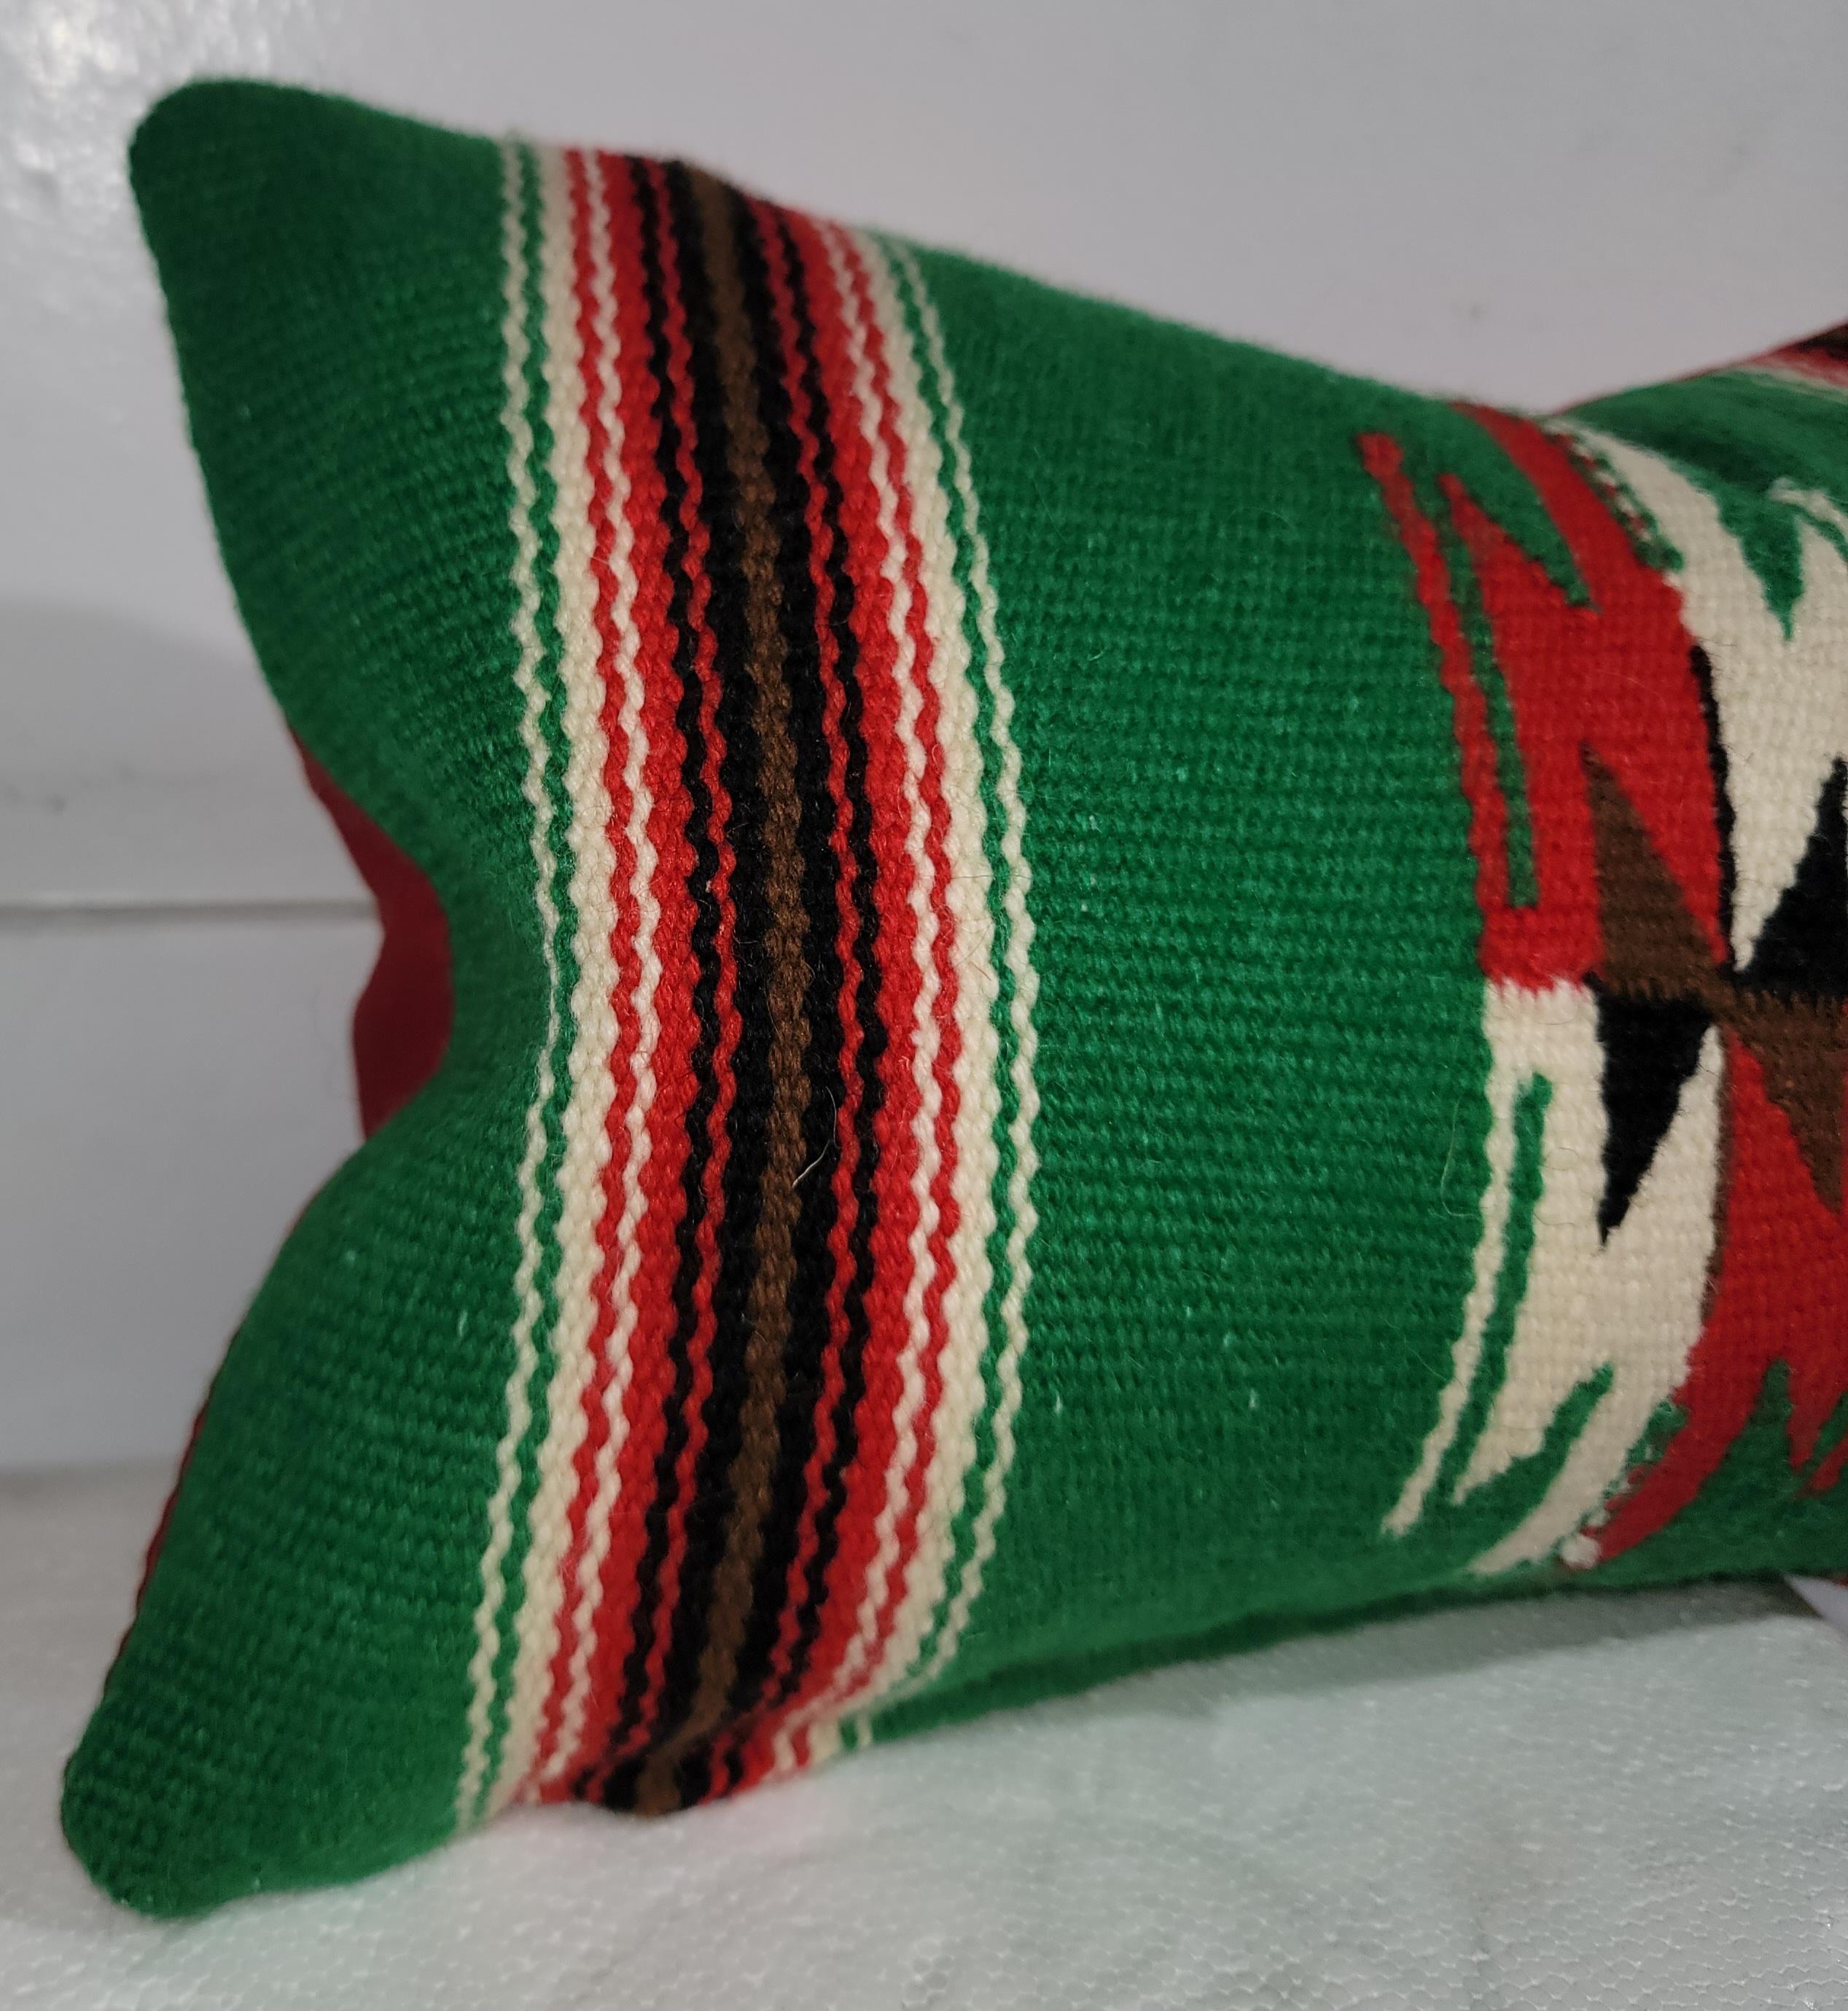 This is a fantastic Mexican / AmericanIndian  weaving serape pillow.The backing is in a cotton linen.The condition is perfect !